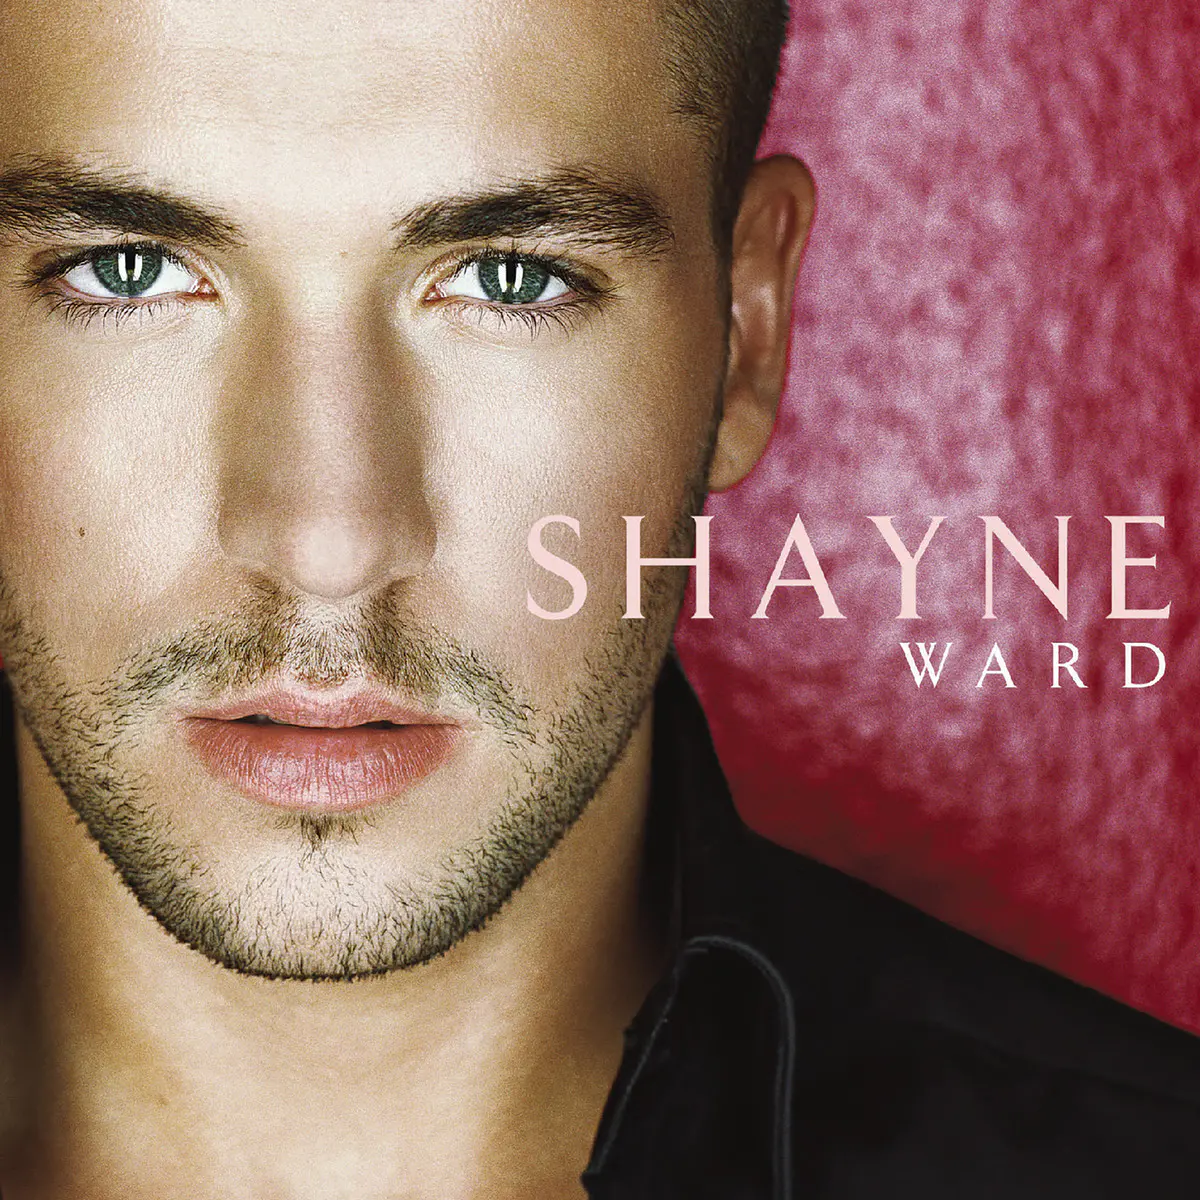 That S My Goal Mp3 Song Download Shayne Ward That S My Goal Song